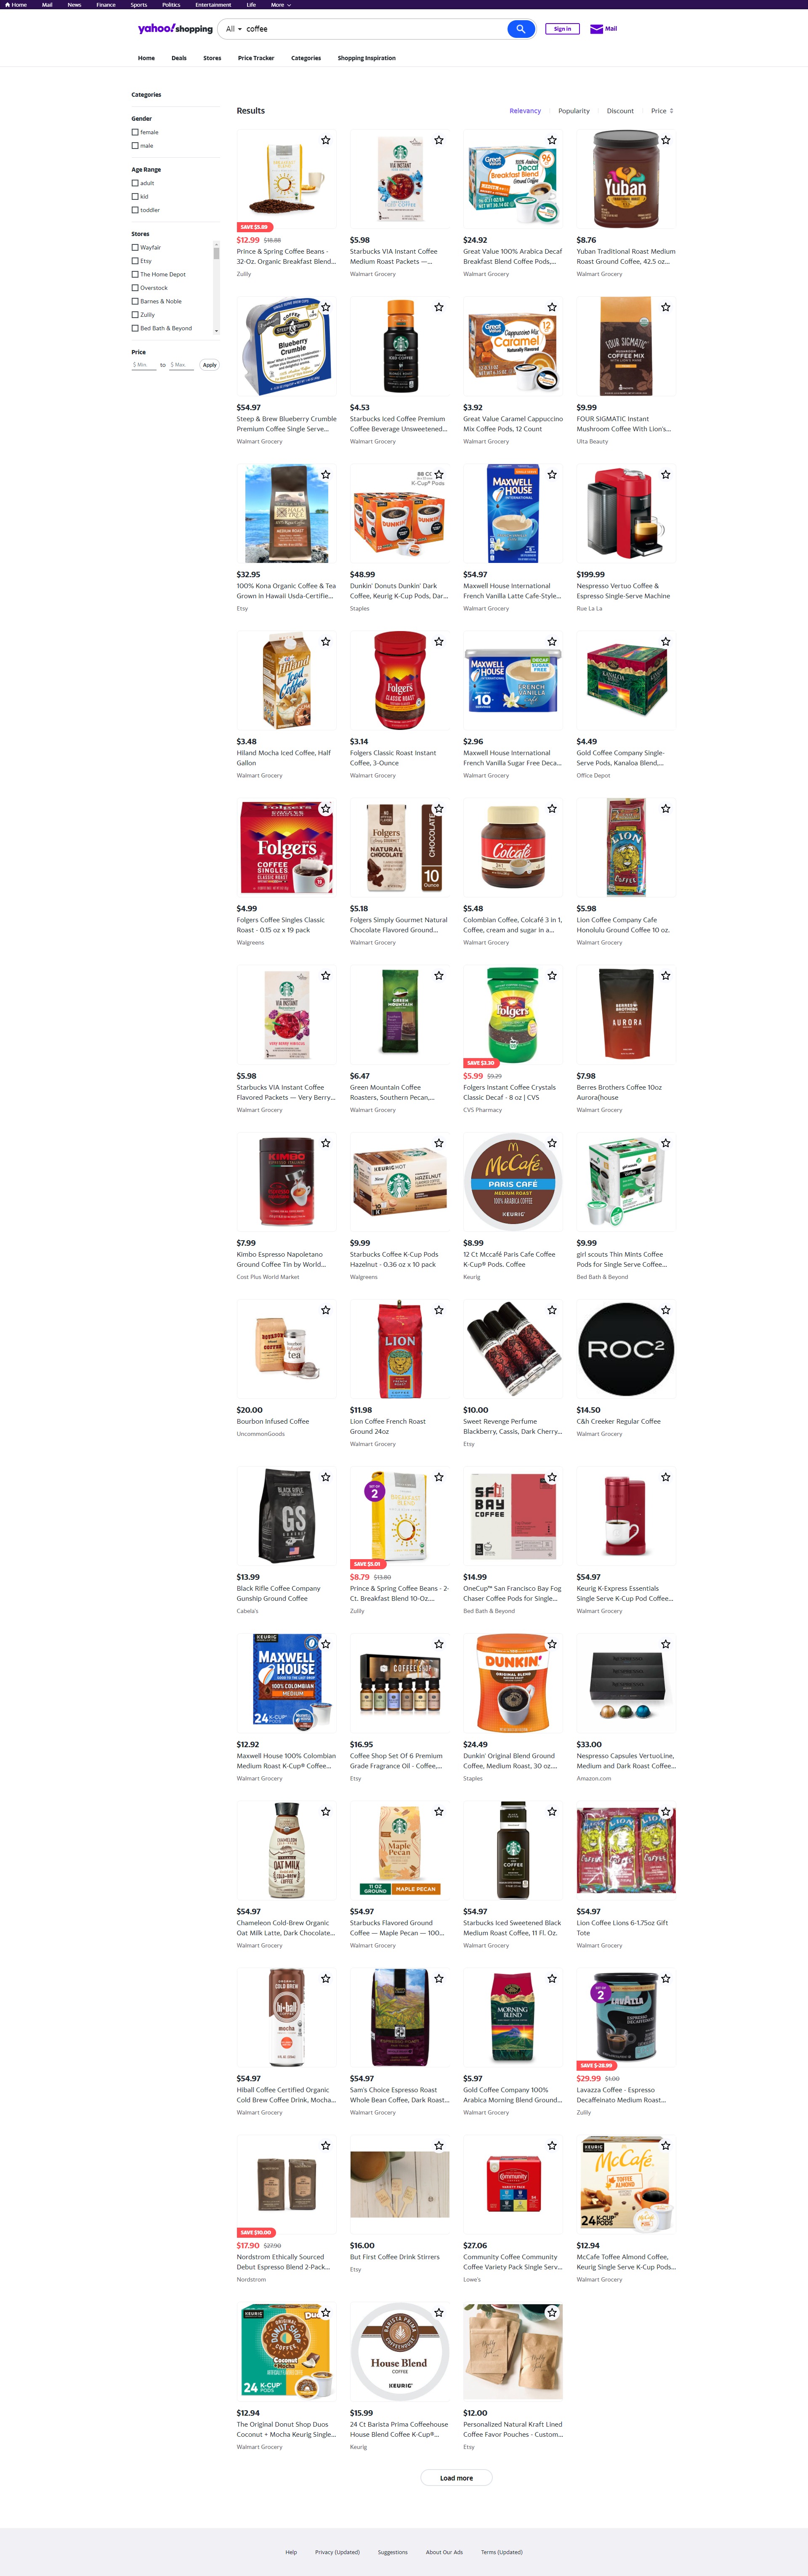 Yahoo! Shopping search results for p:coffee